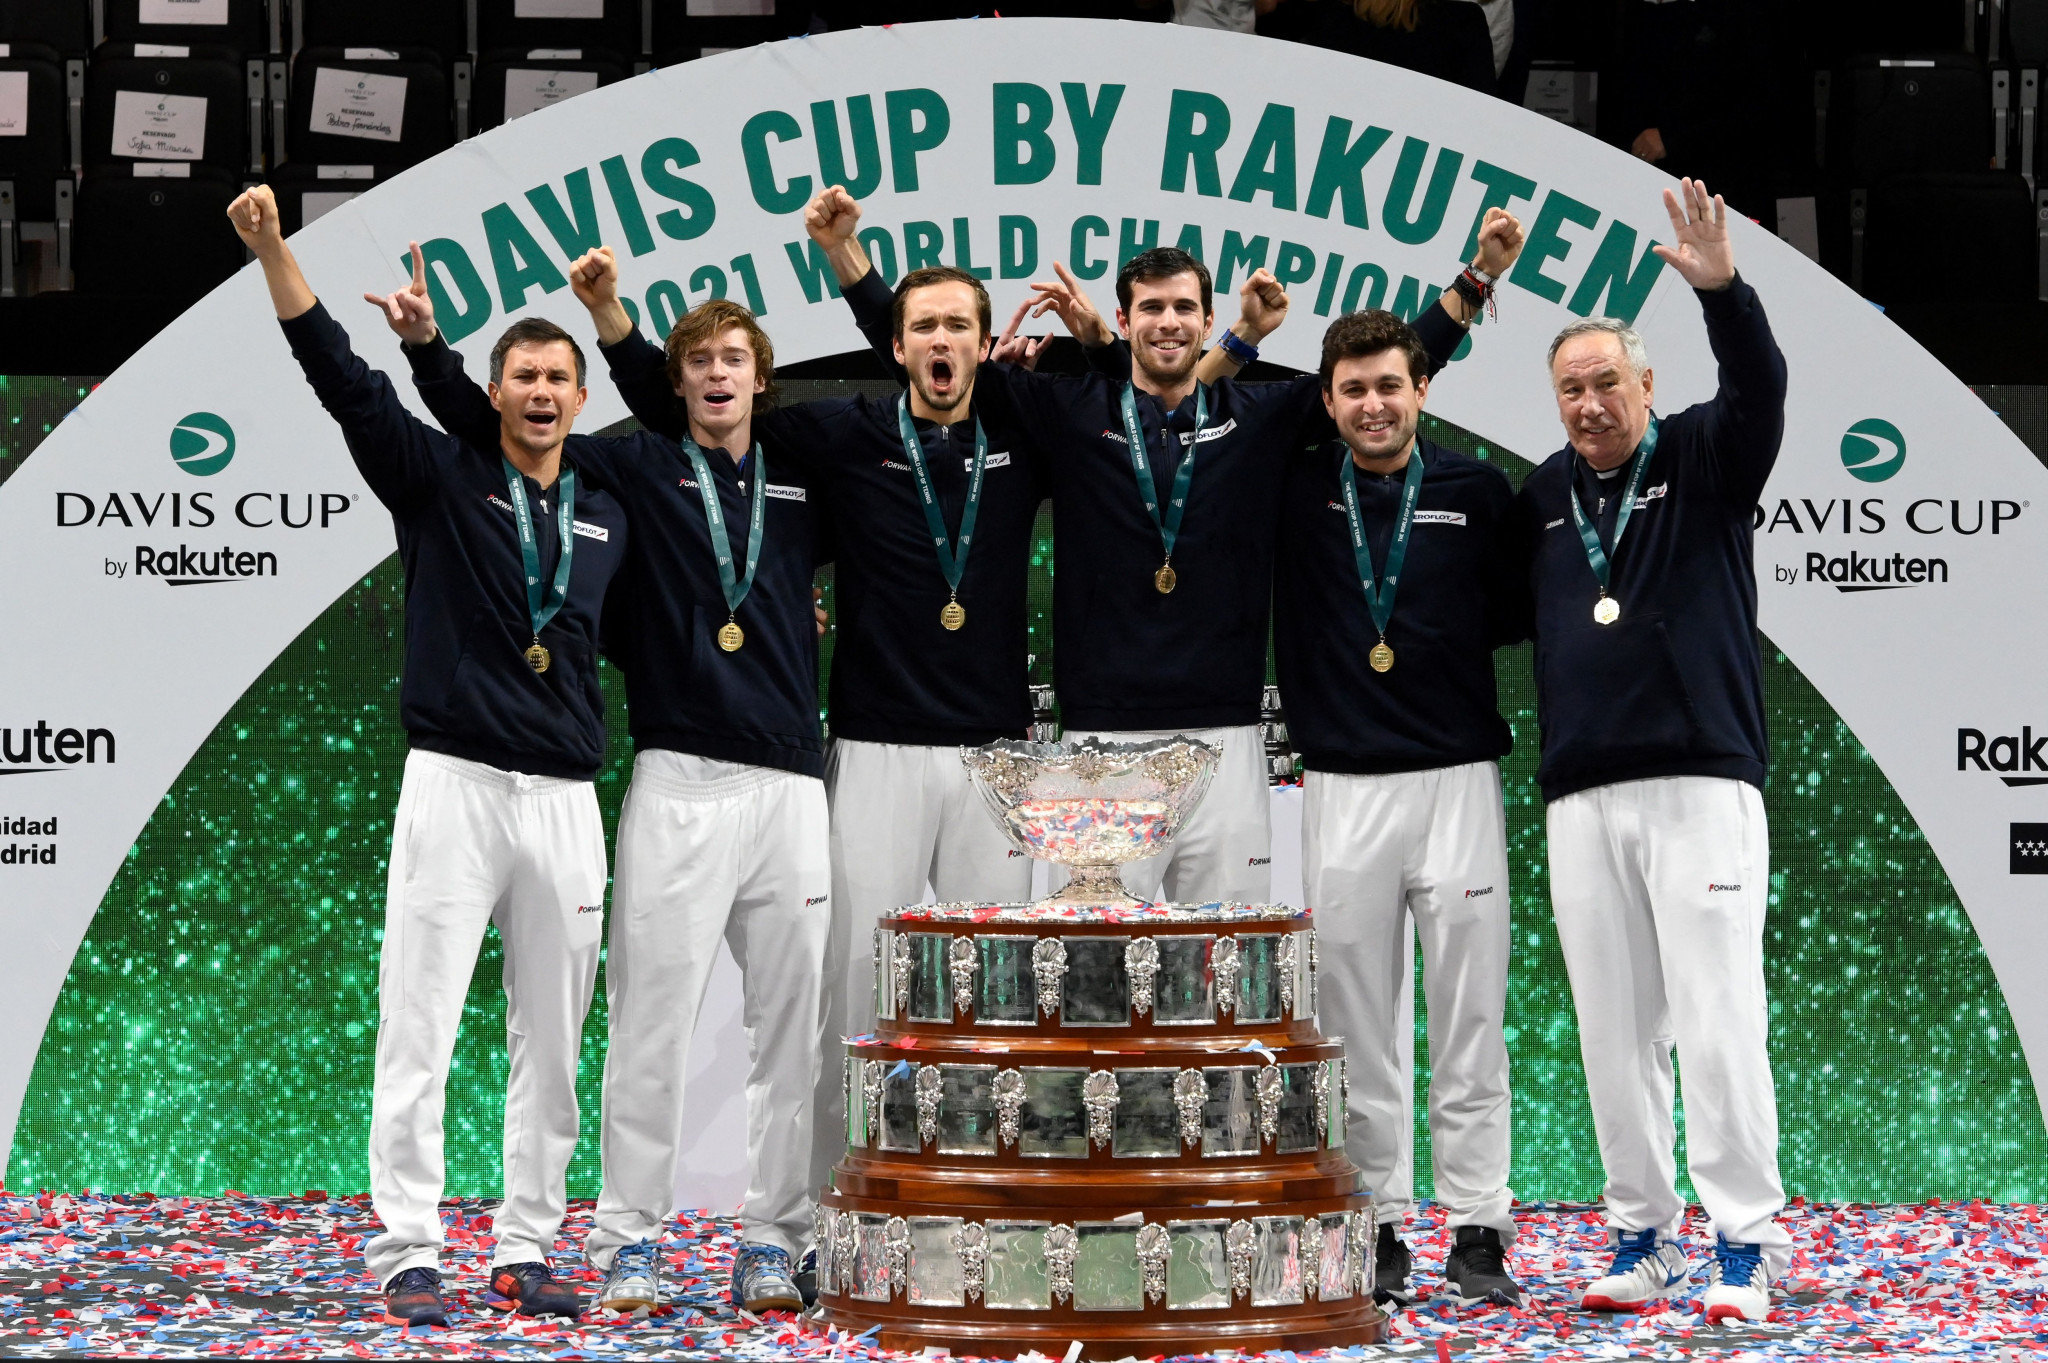 The Russian Tennis Federation were the winners of the 2021 Davis Cup ©Getty Images